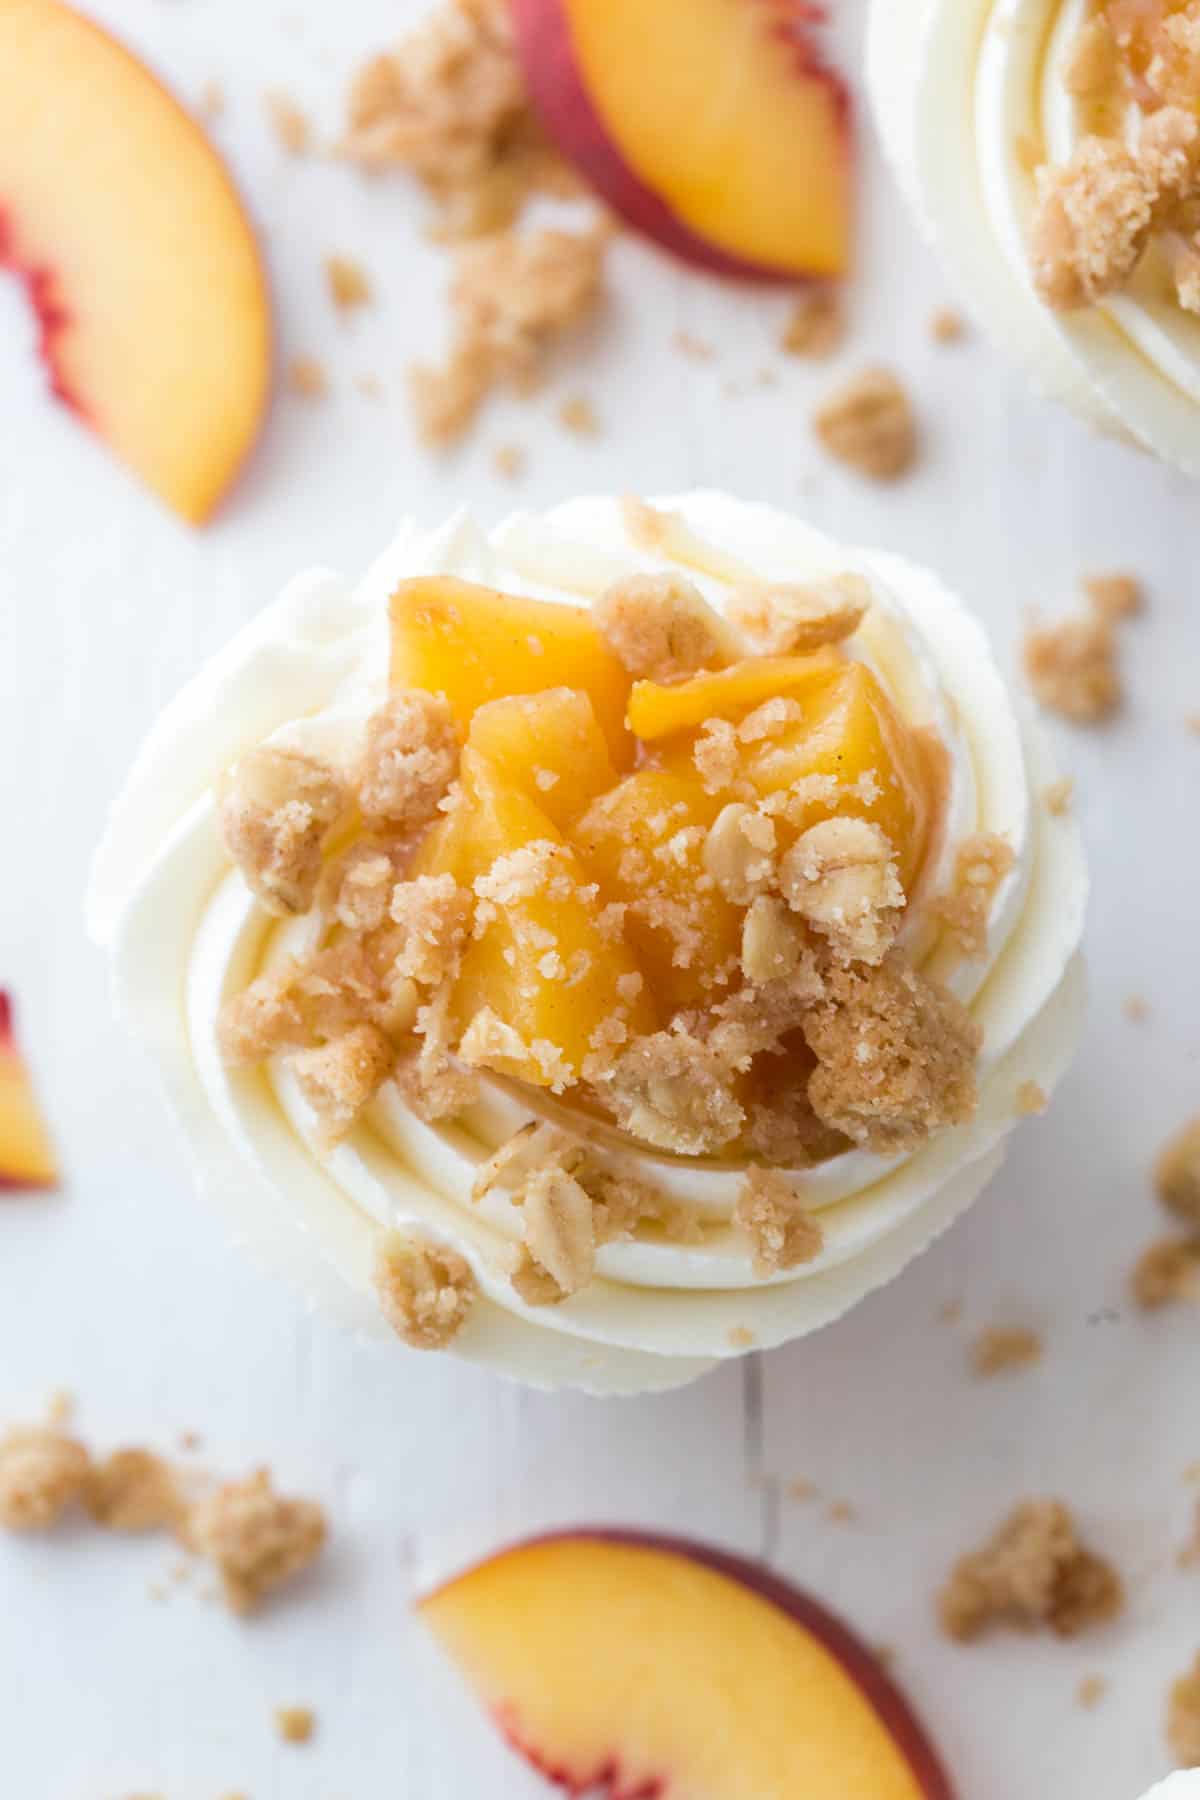 A close up photo of a peach pie cupcake on a white countertop.